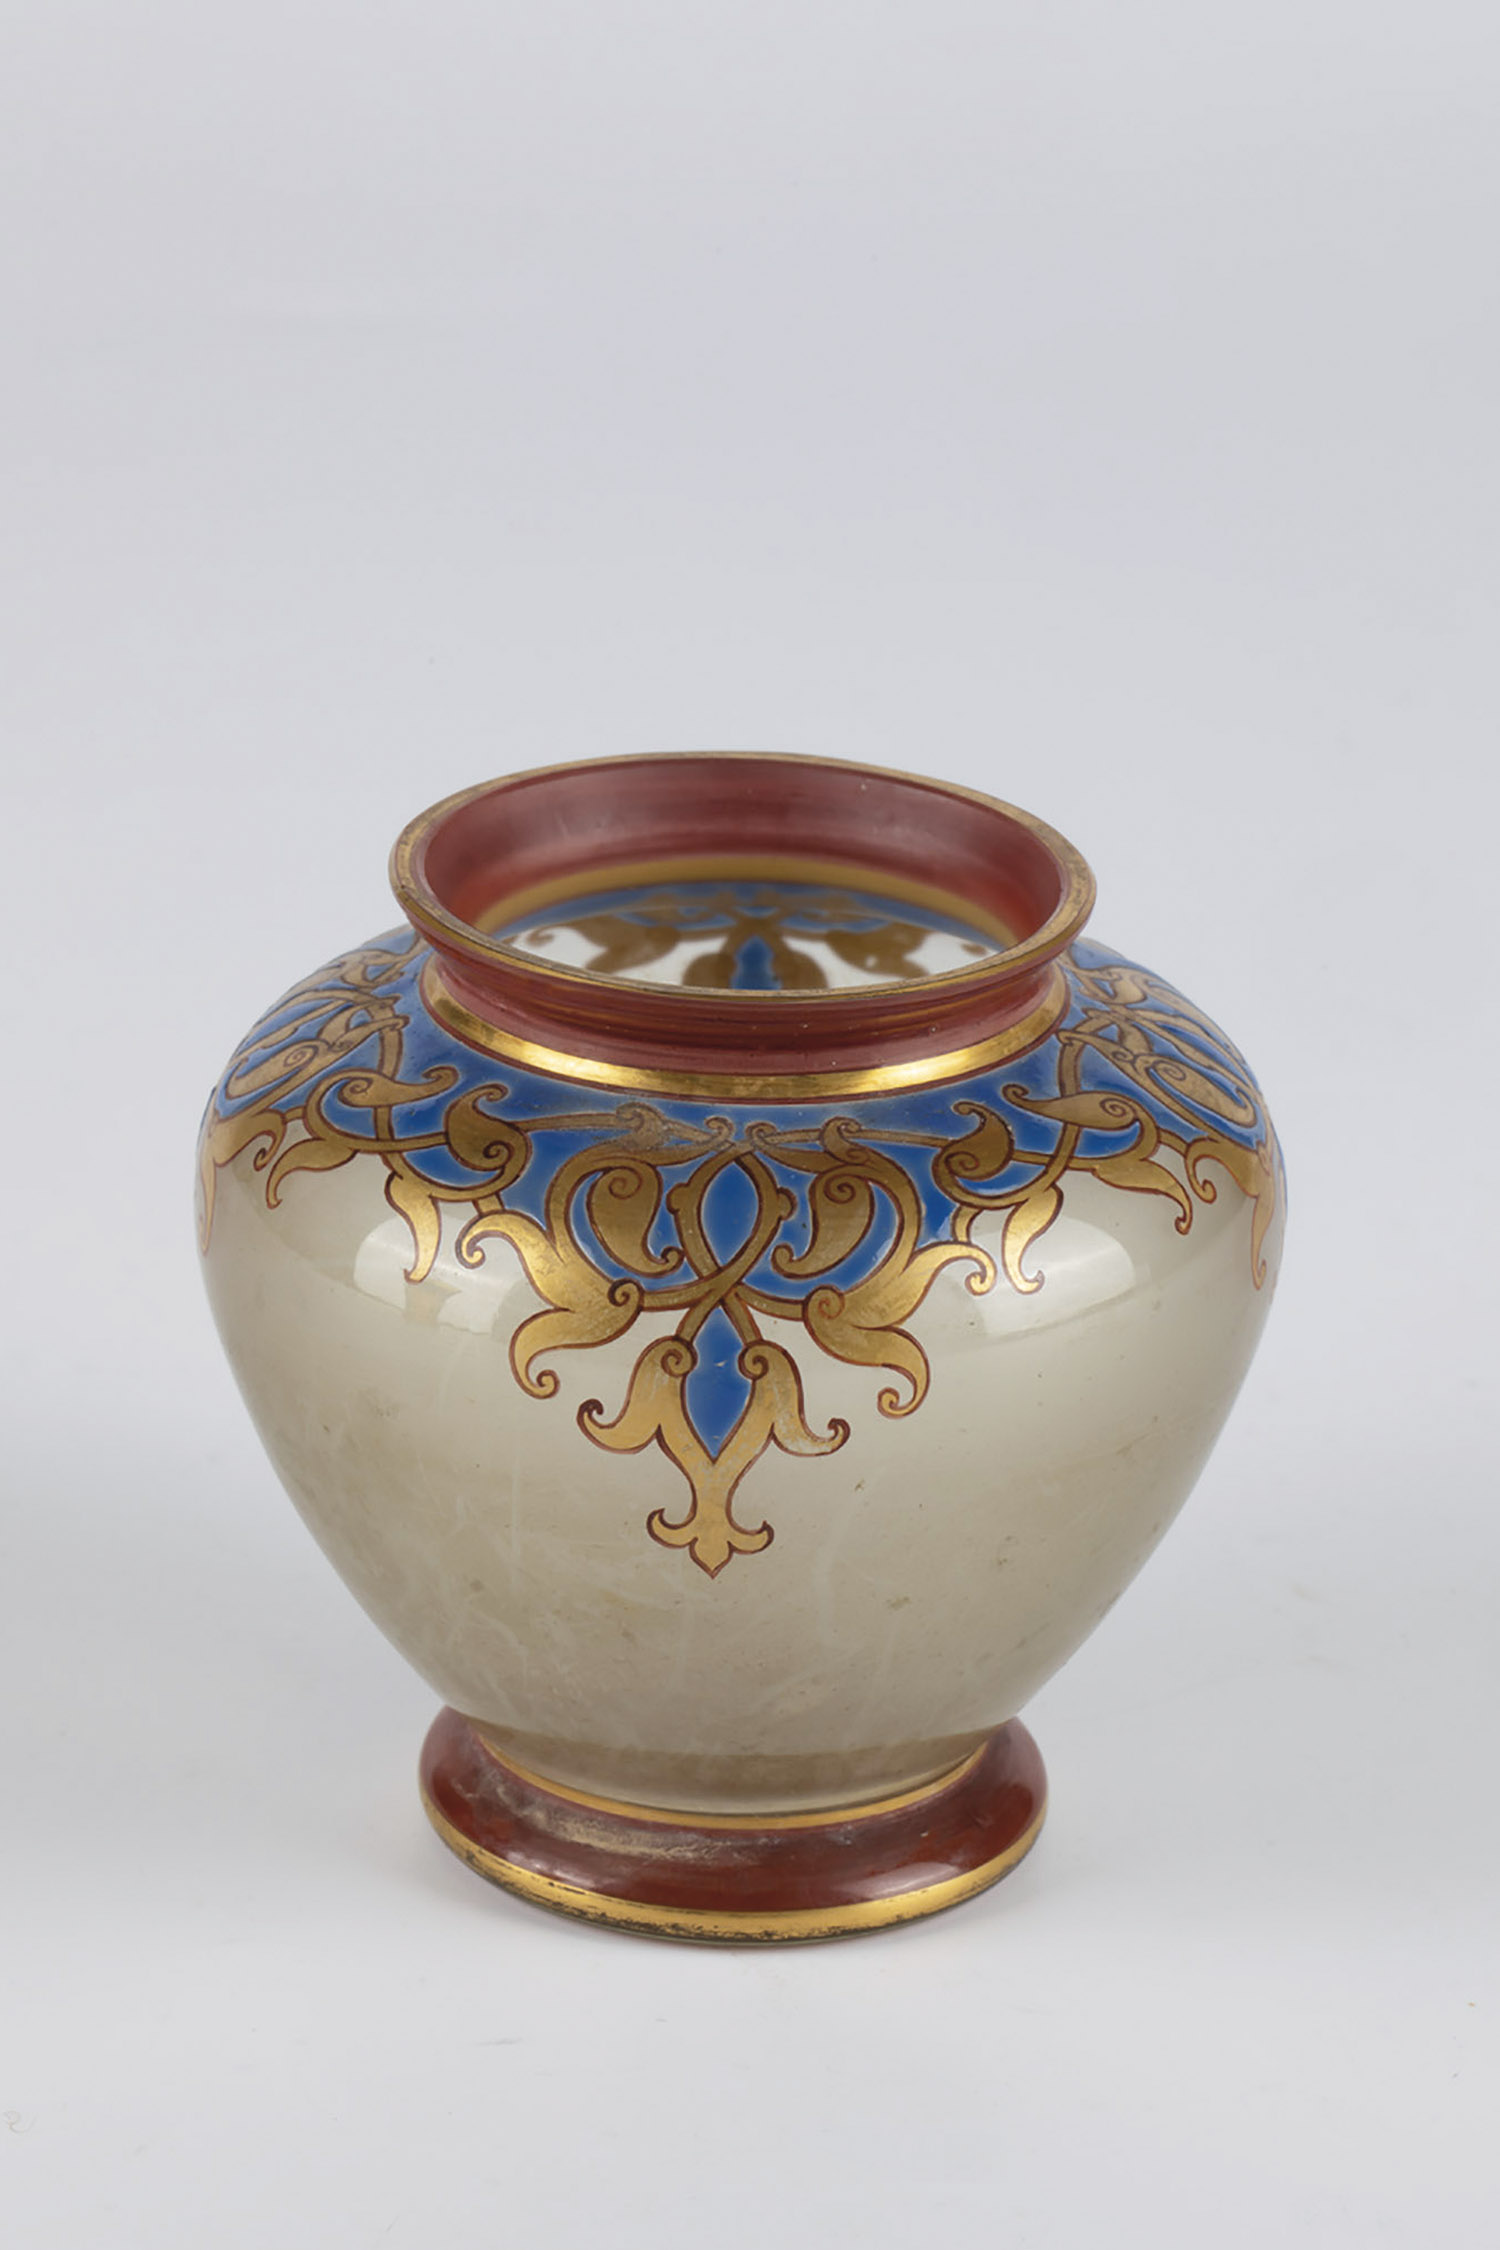 Small vase Bohemia, ca. 1900 Colourless glass with coloured opaque enamel and gold. Decorated with